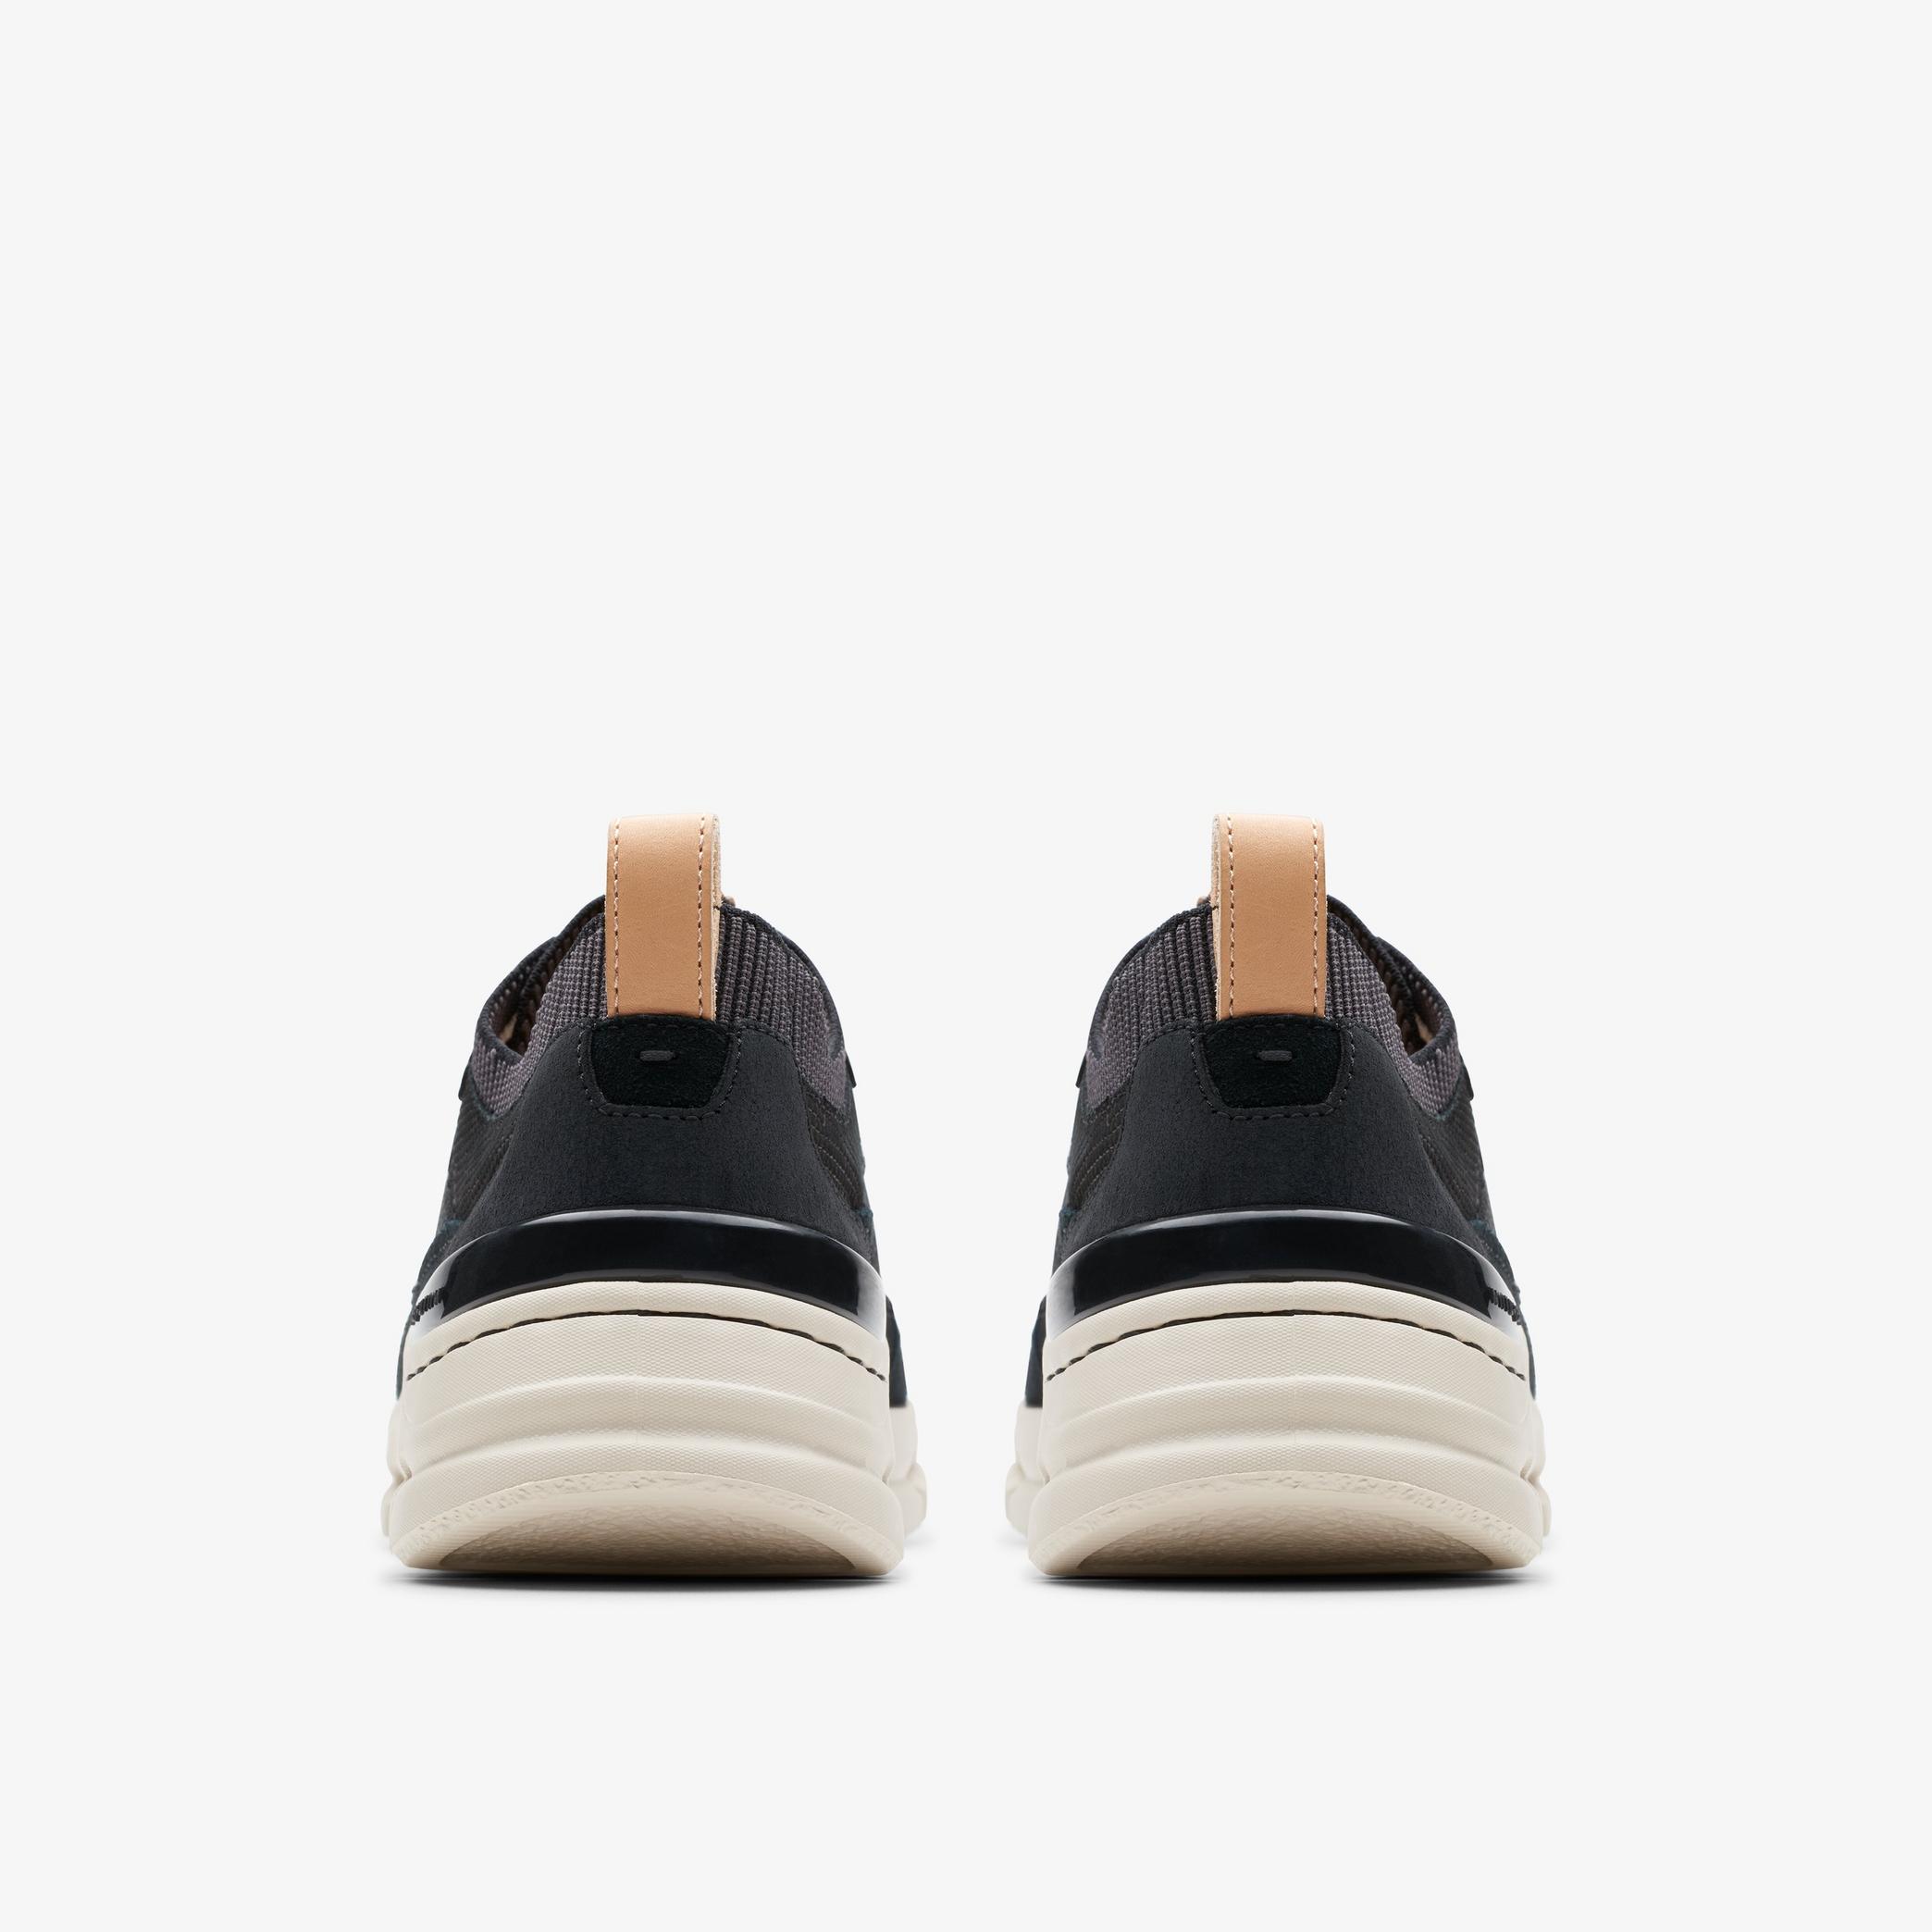 WOMENS NATURE X COVE Black Combination Sneakers | Clarks US